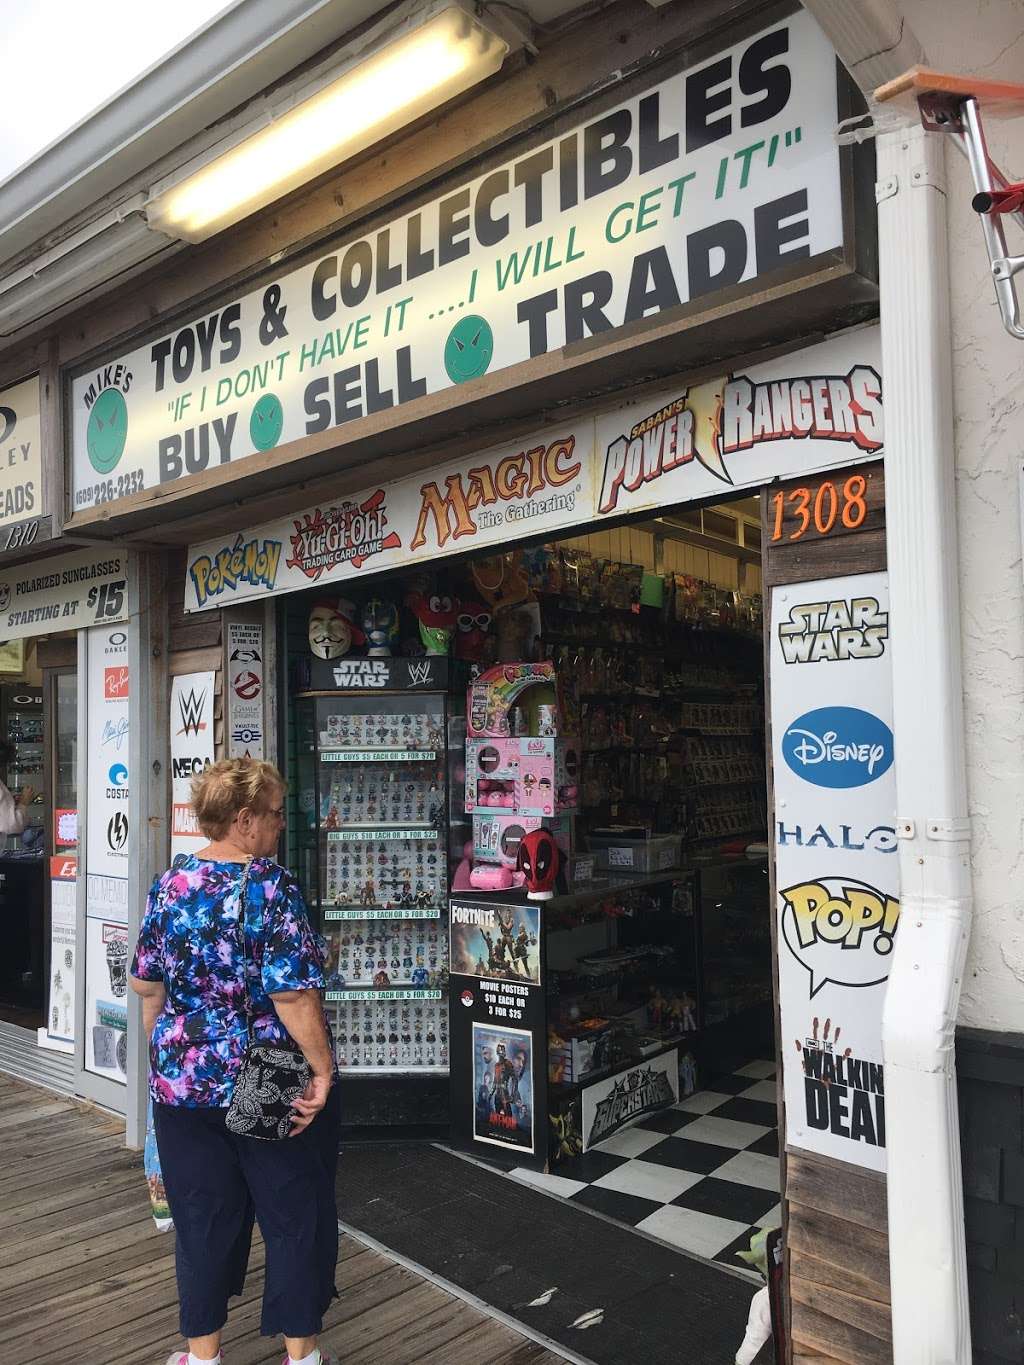 Mikes Toys and Collectibles | 1308 Boardwalk, Ocean City, NJ 08226 | Phone: (609) 553-7216